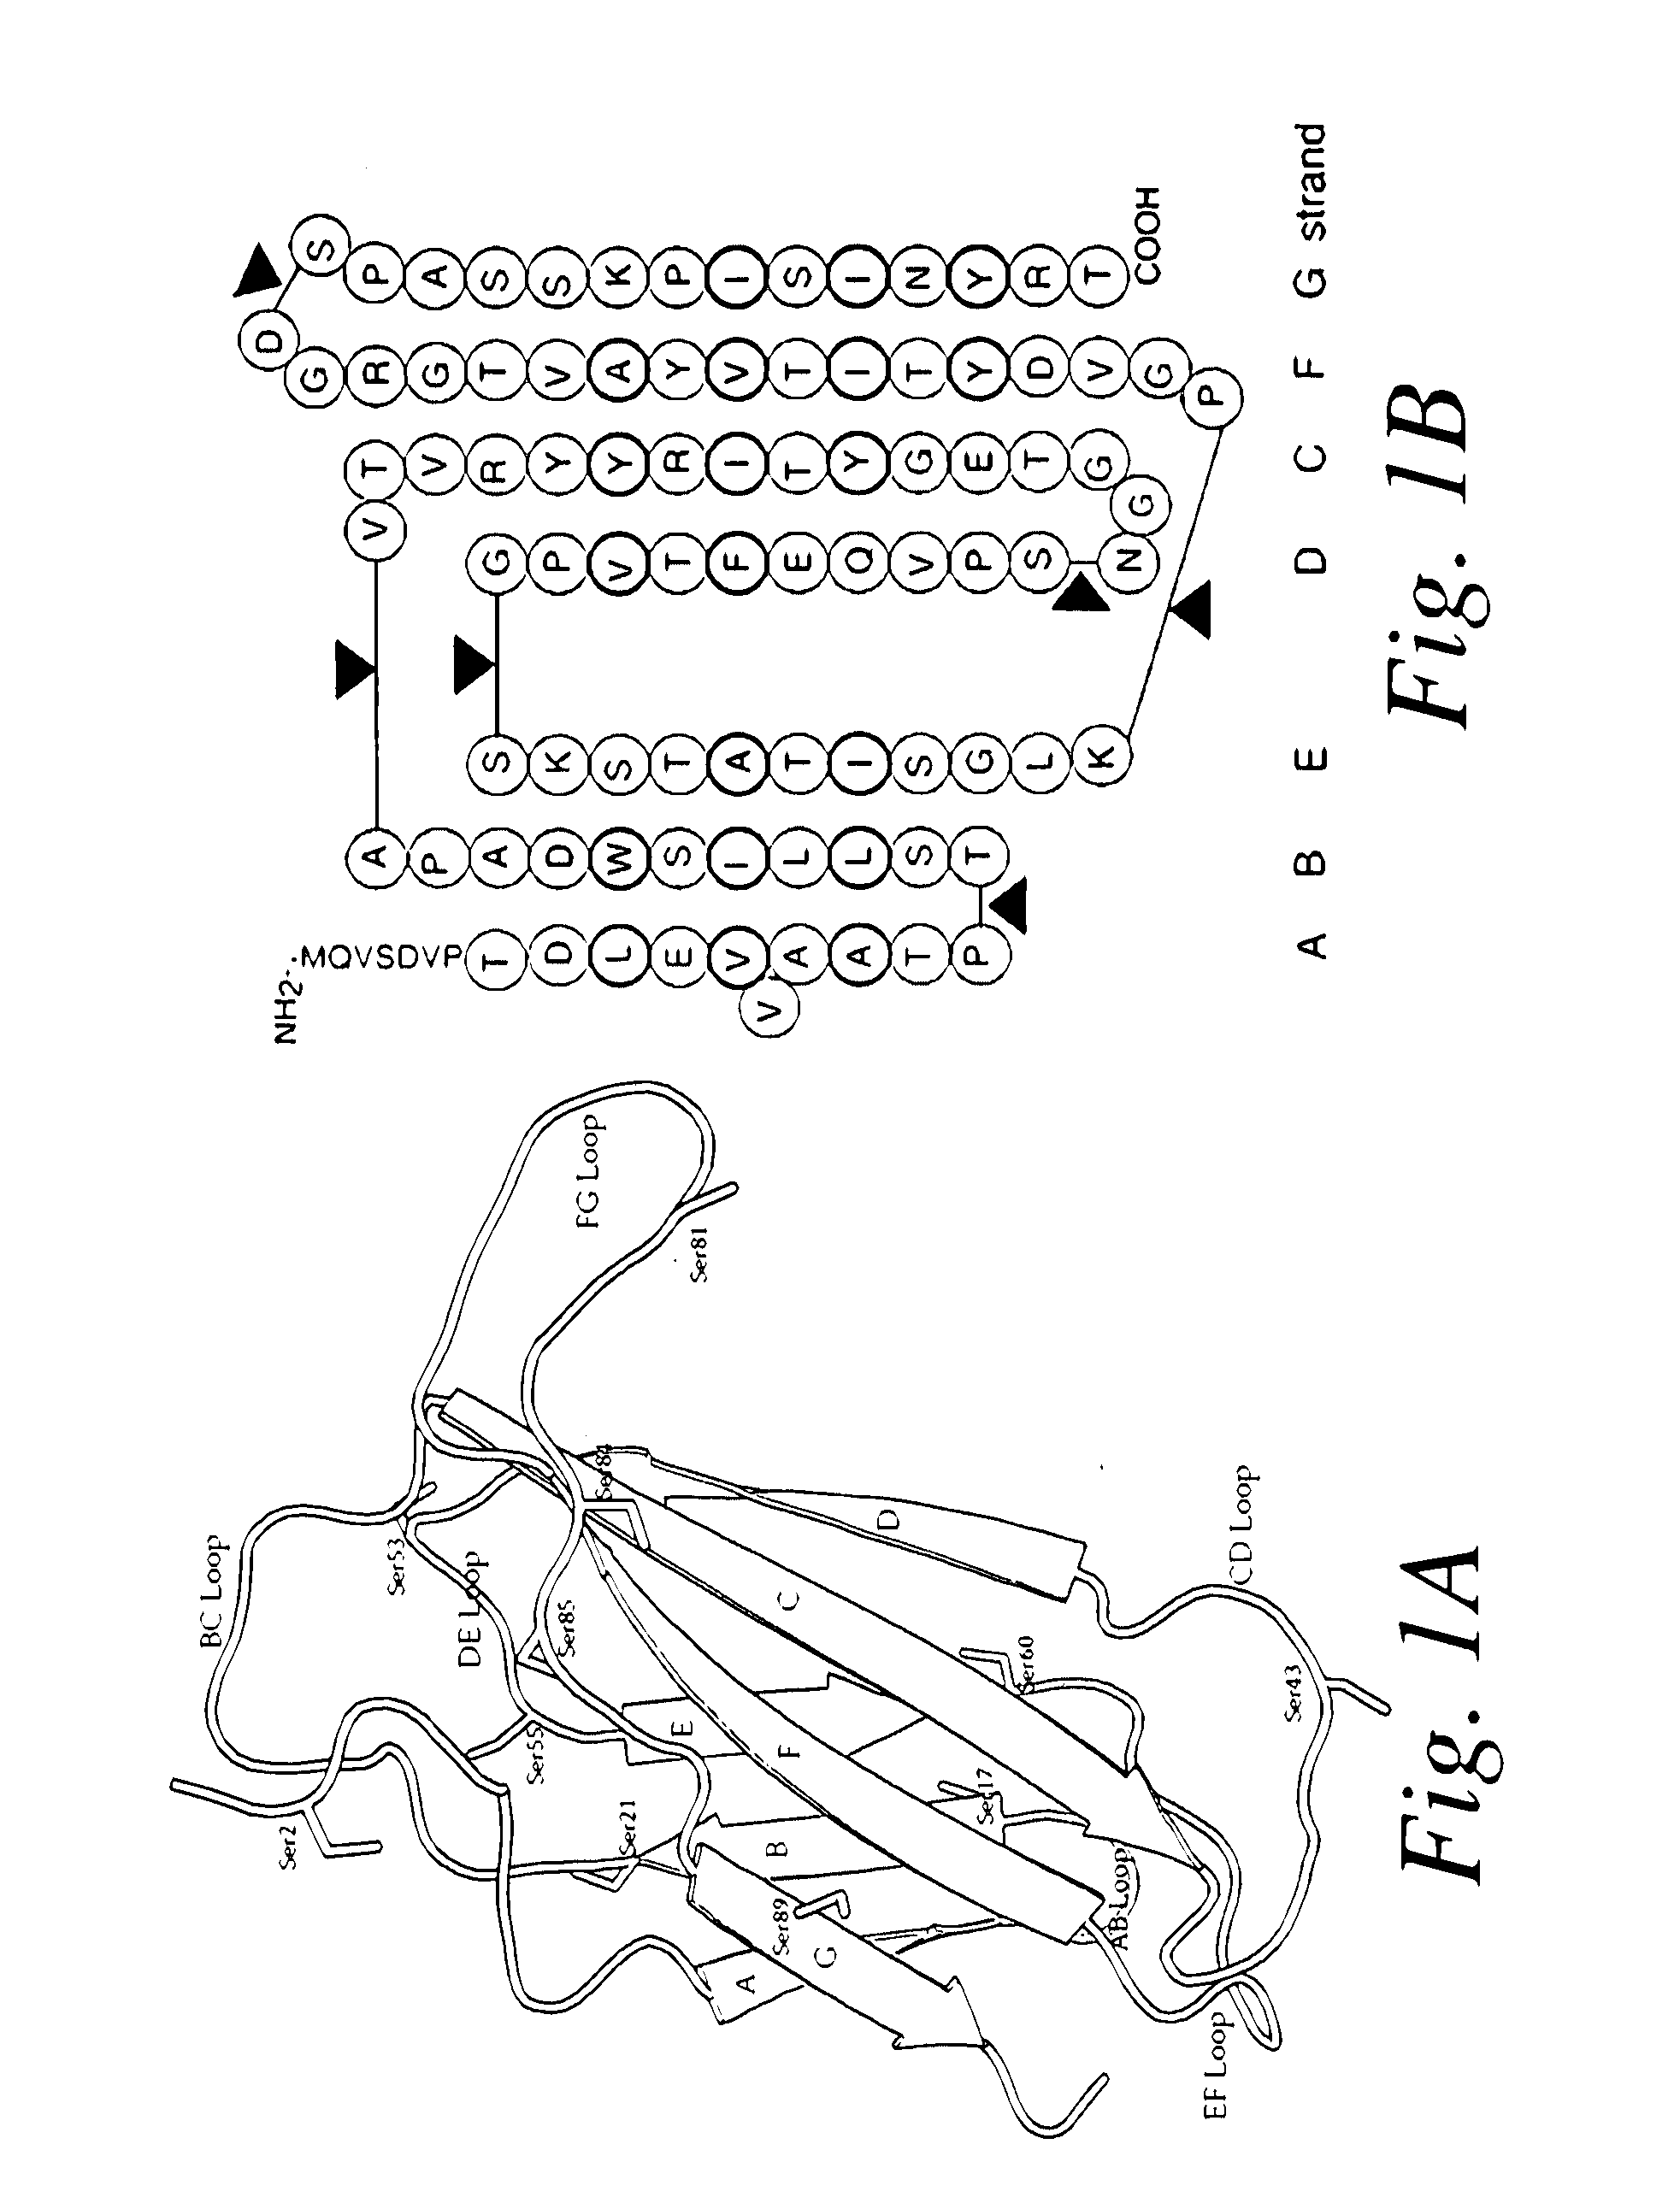 Fibronectin-based binding molecules and their use